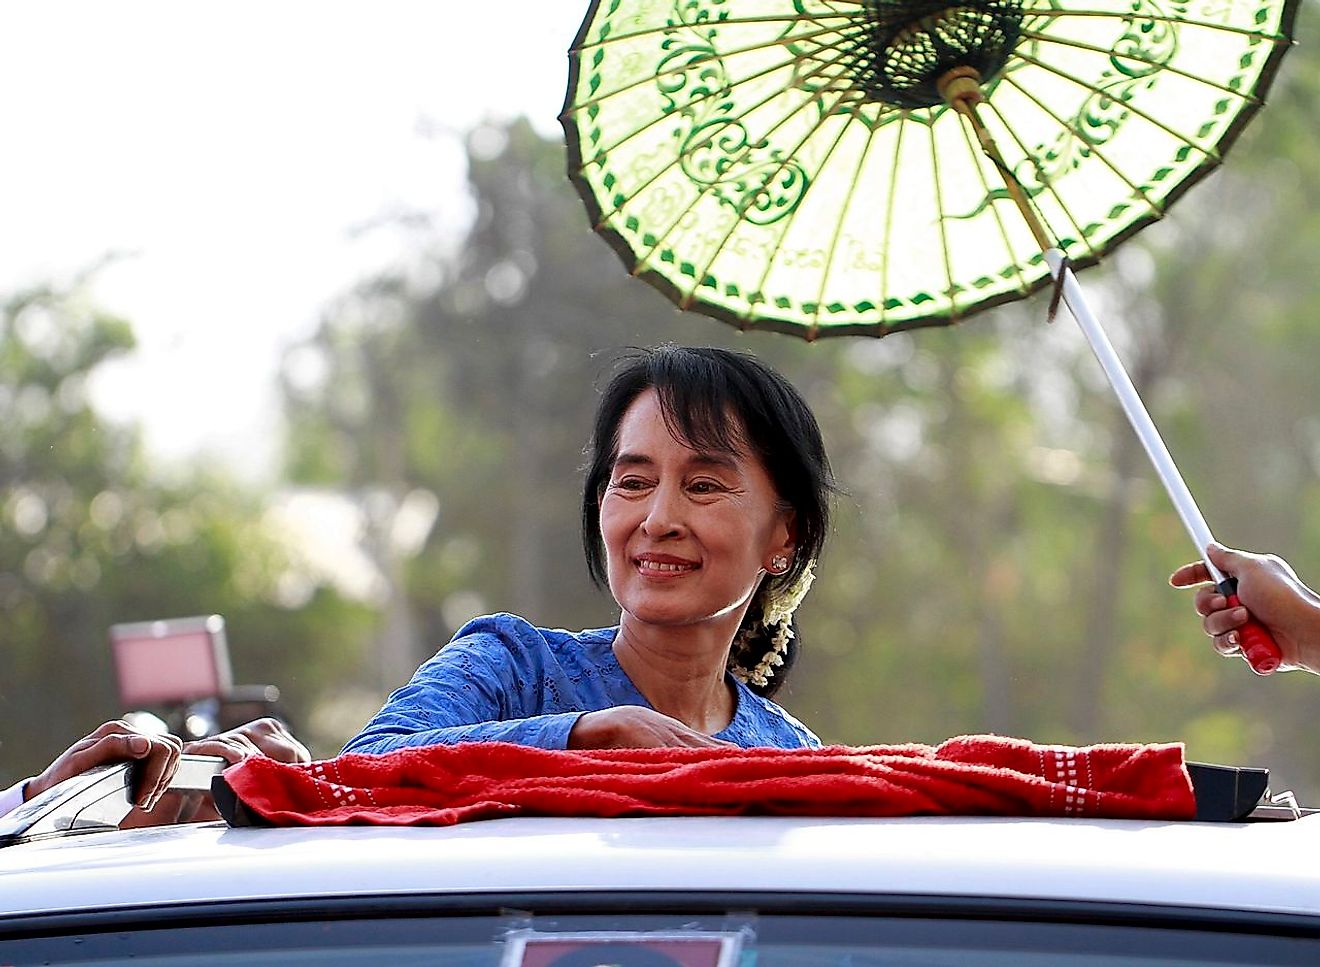 Aung San Suu Kyi arrives to give a speech to the supporters during the 2012 by-election campaign at her constituency Kawhmu township, Myanmar on 22 March 2012. Image credit: Htoo Tay Zar/Wikimedia.org